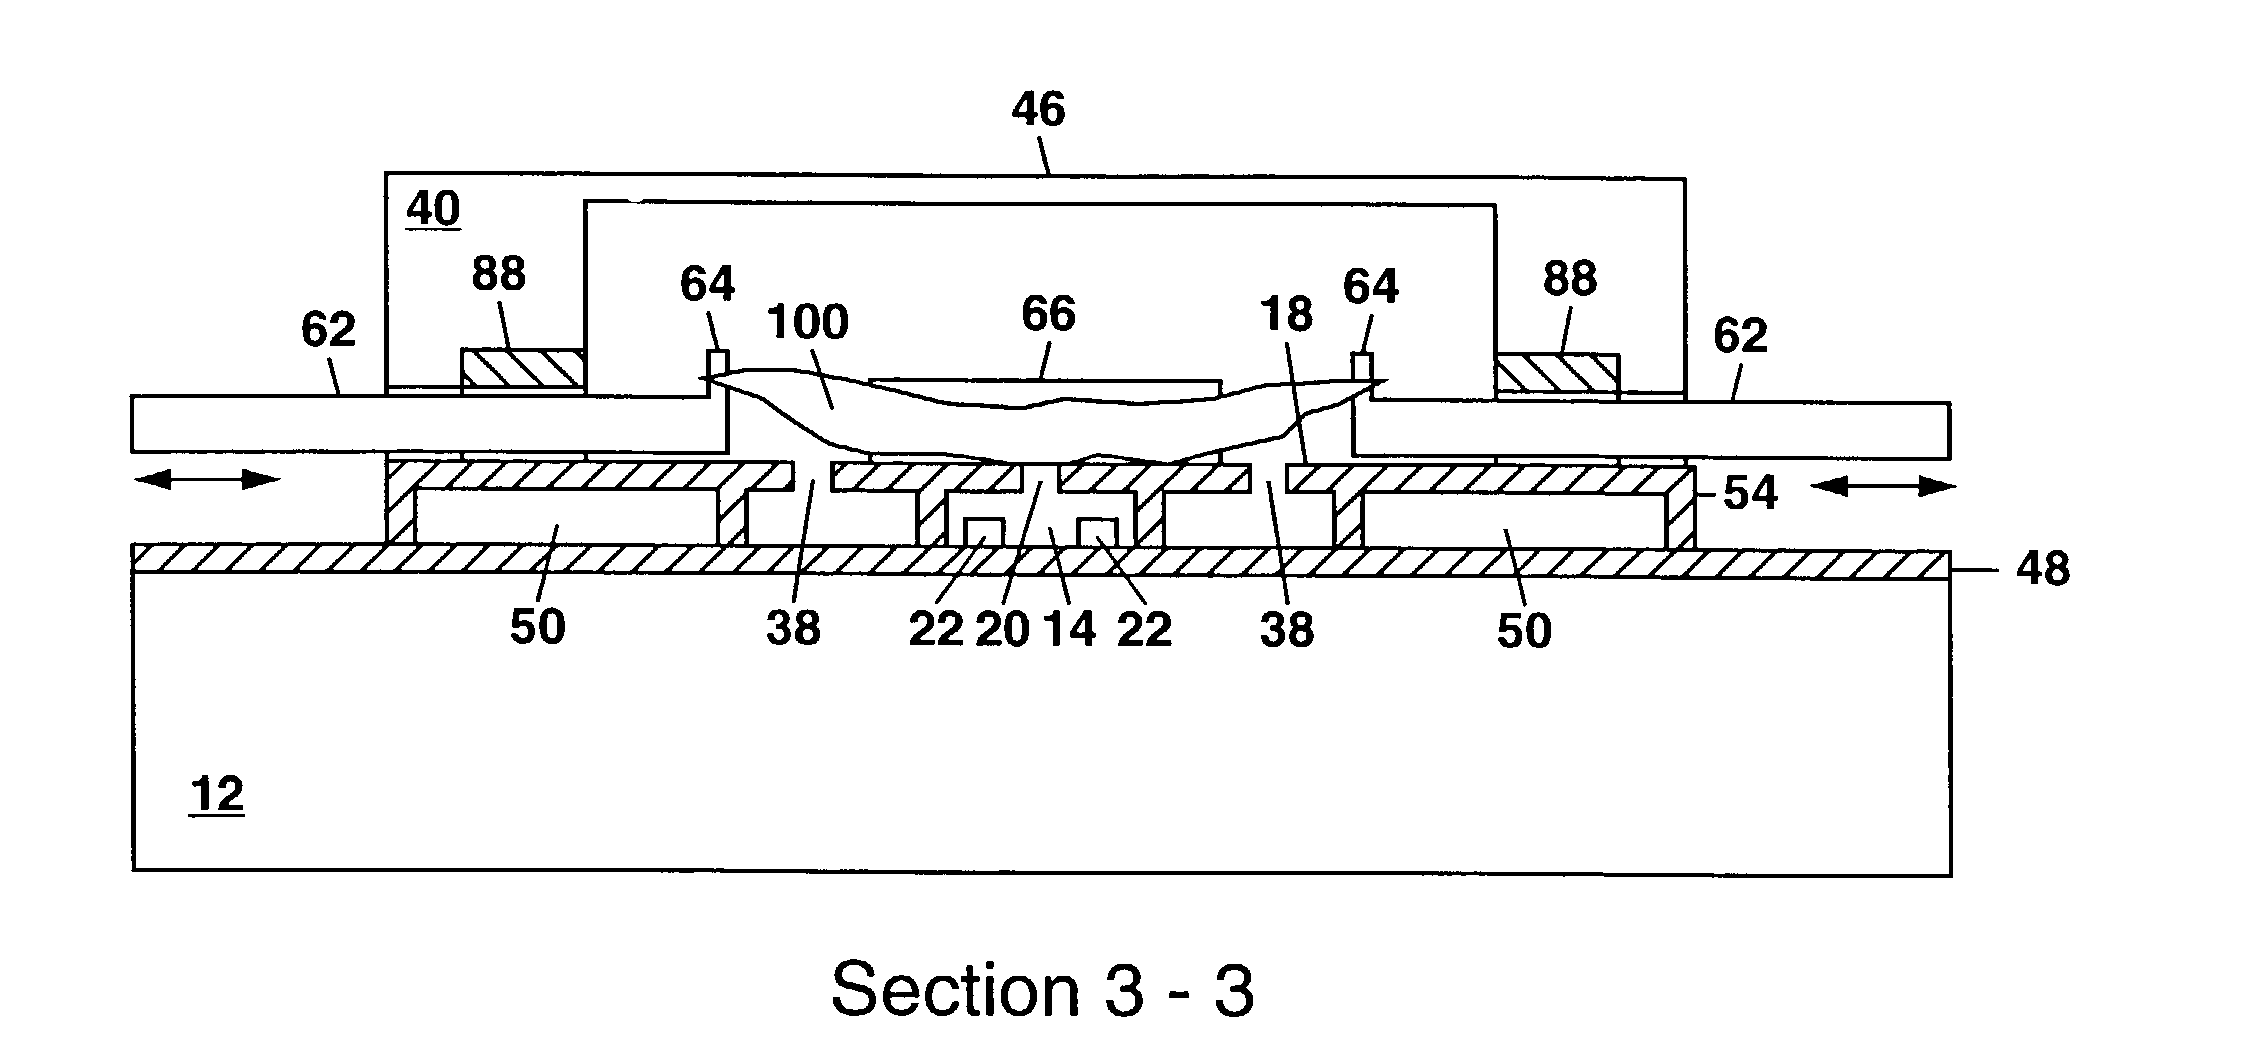 Micromachined patch-clamp apparatus